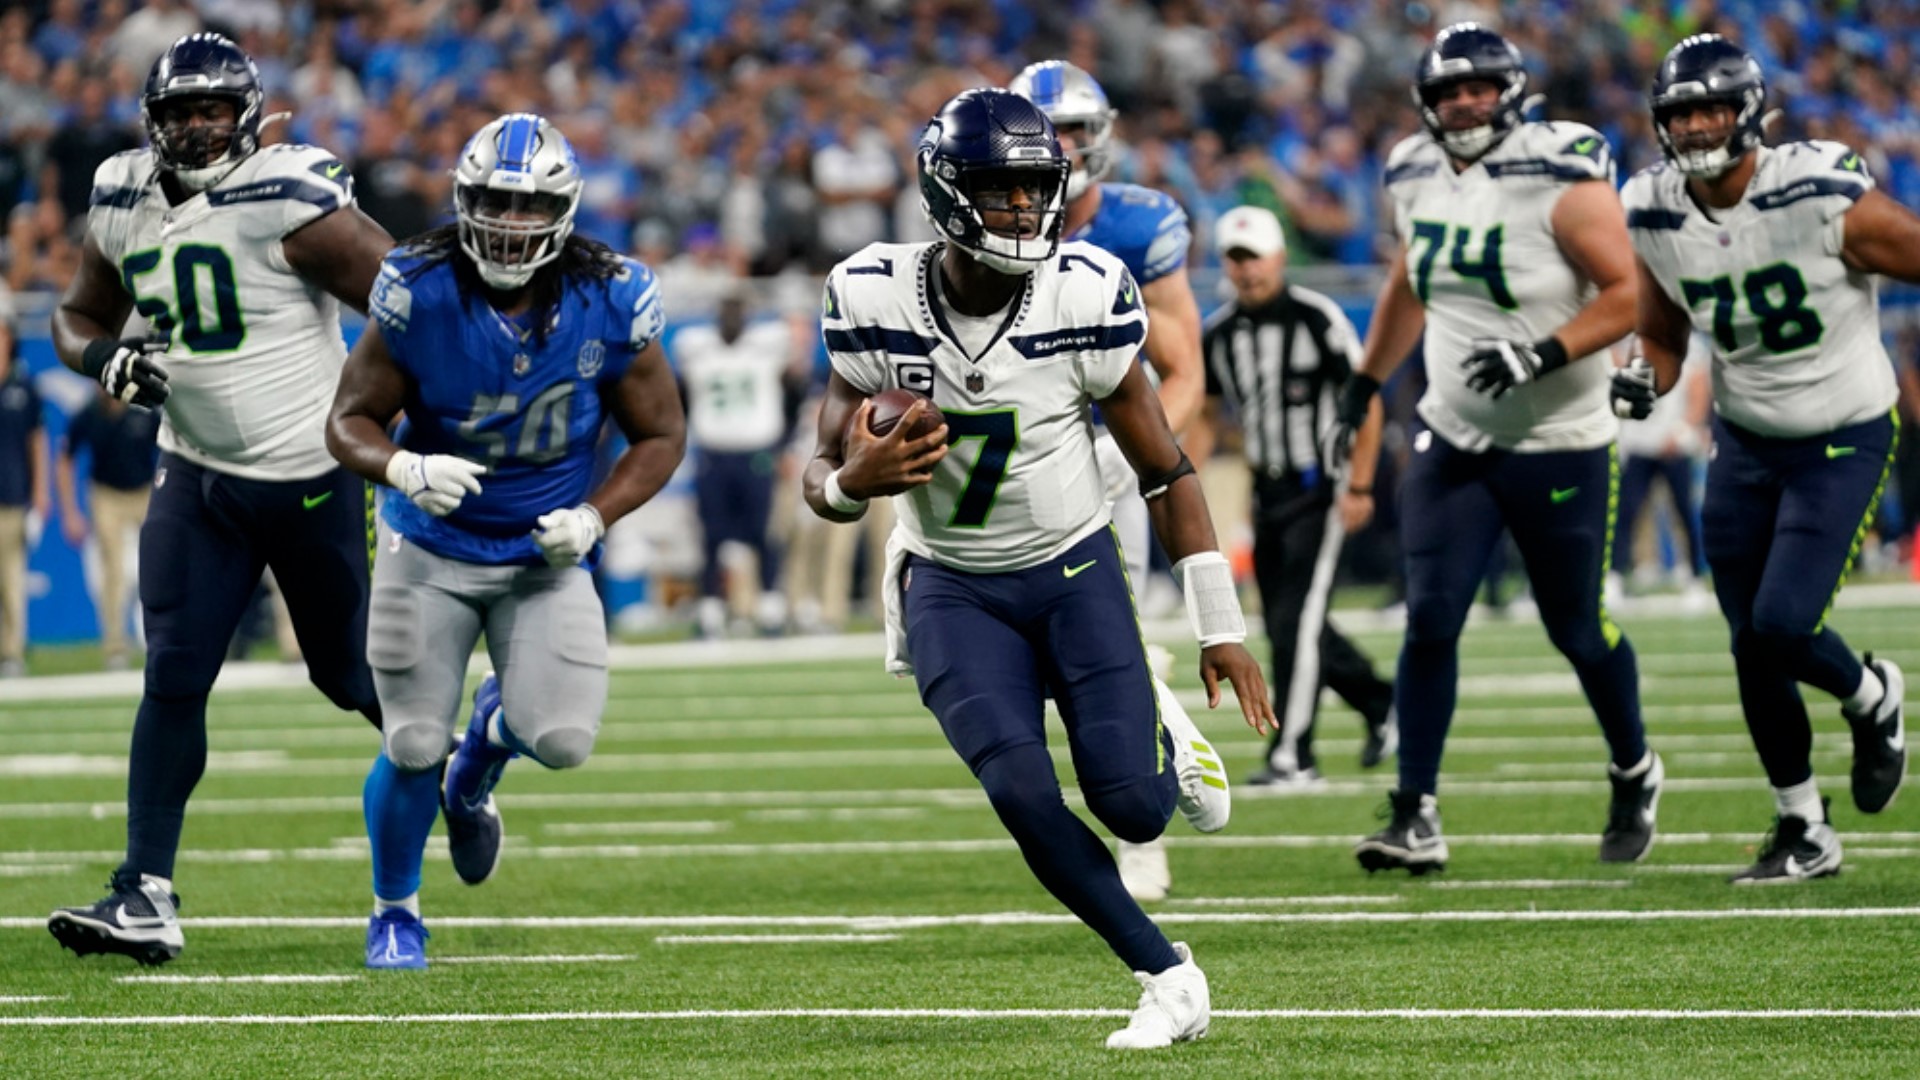 Facing pressure after a big mistake, Smith quieted the Lions crowd with a surgical drive to win the Seahawks' first game.